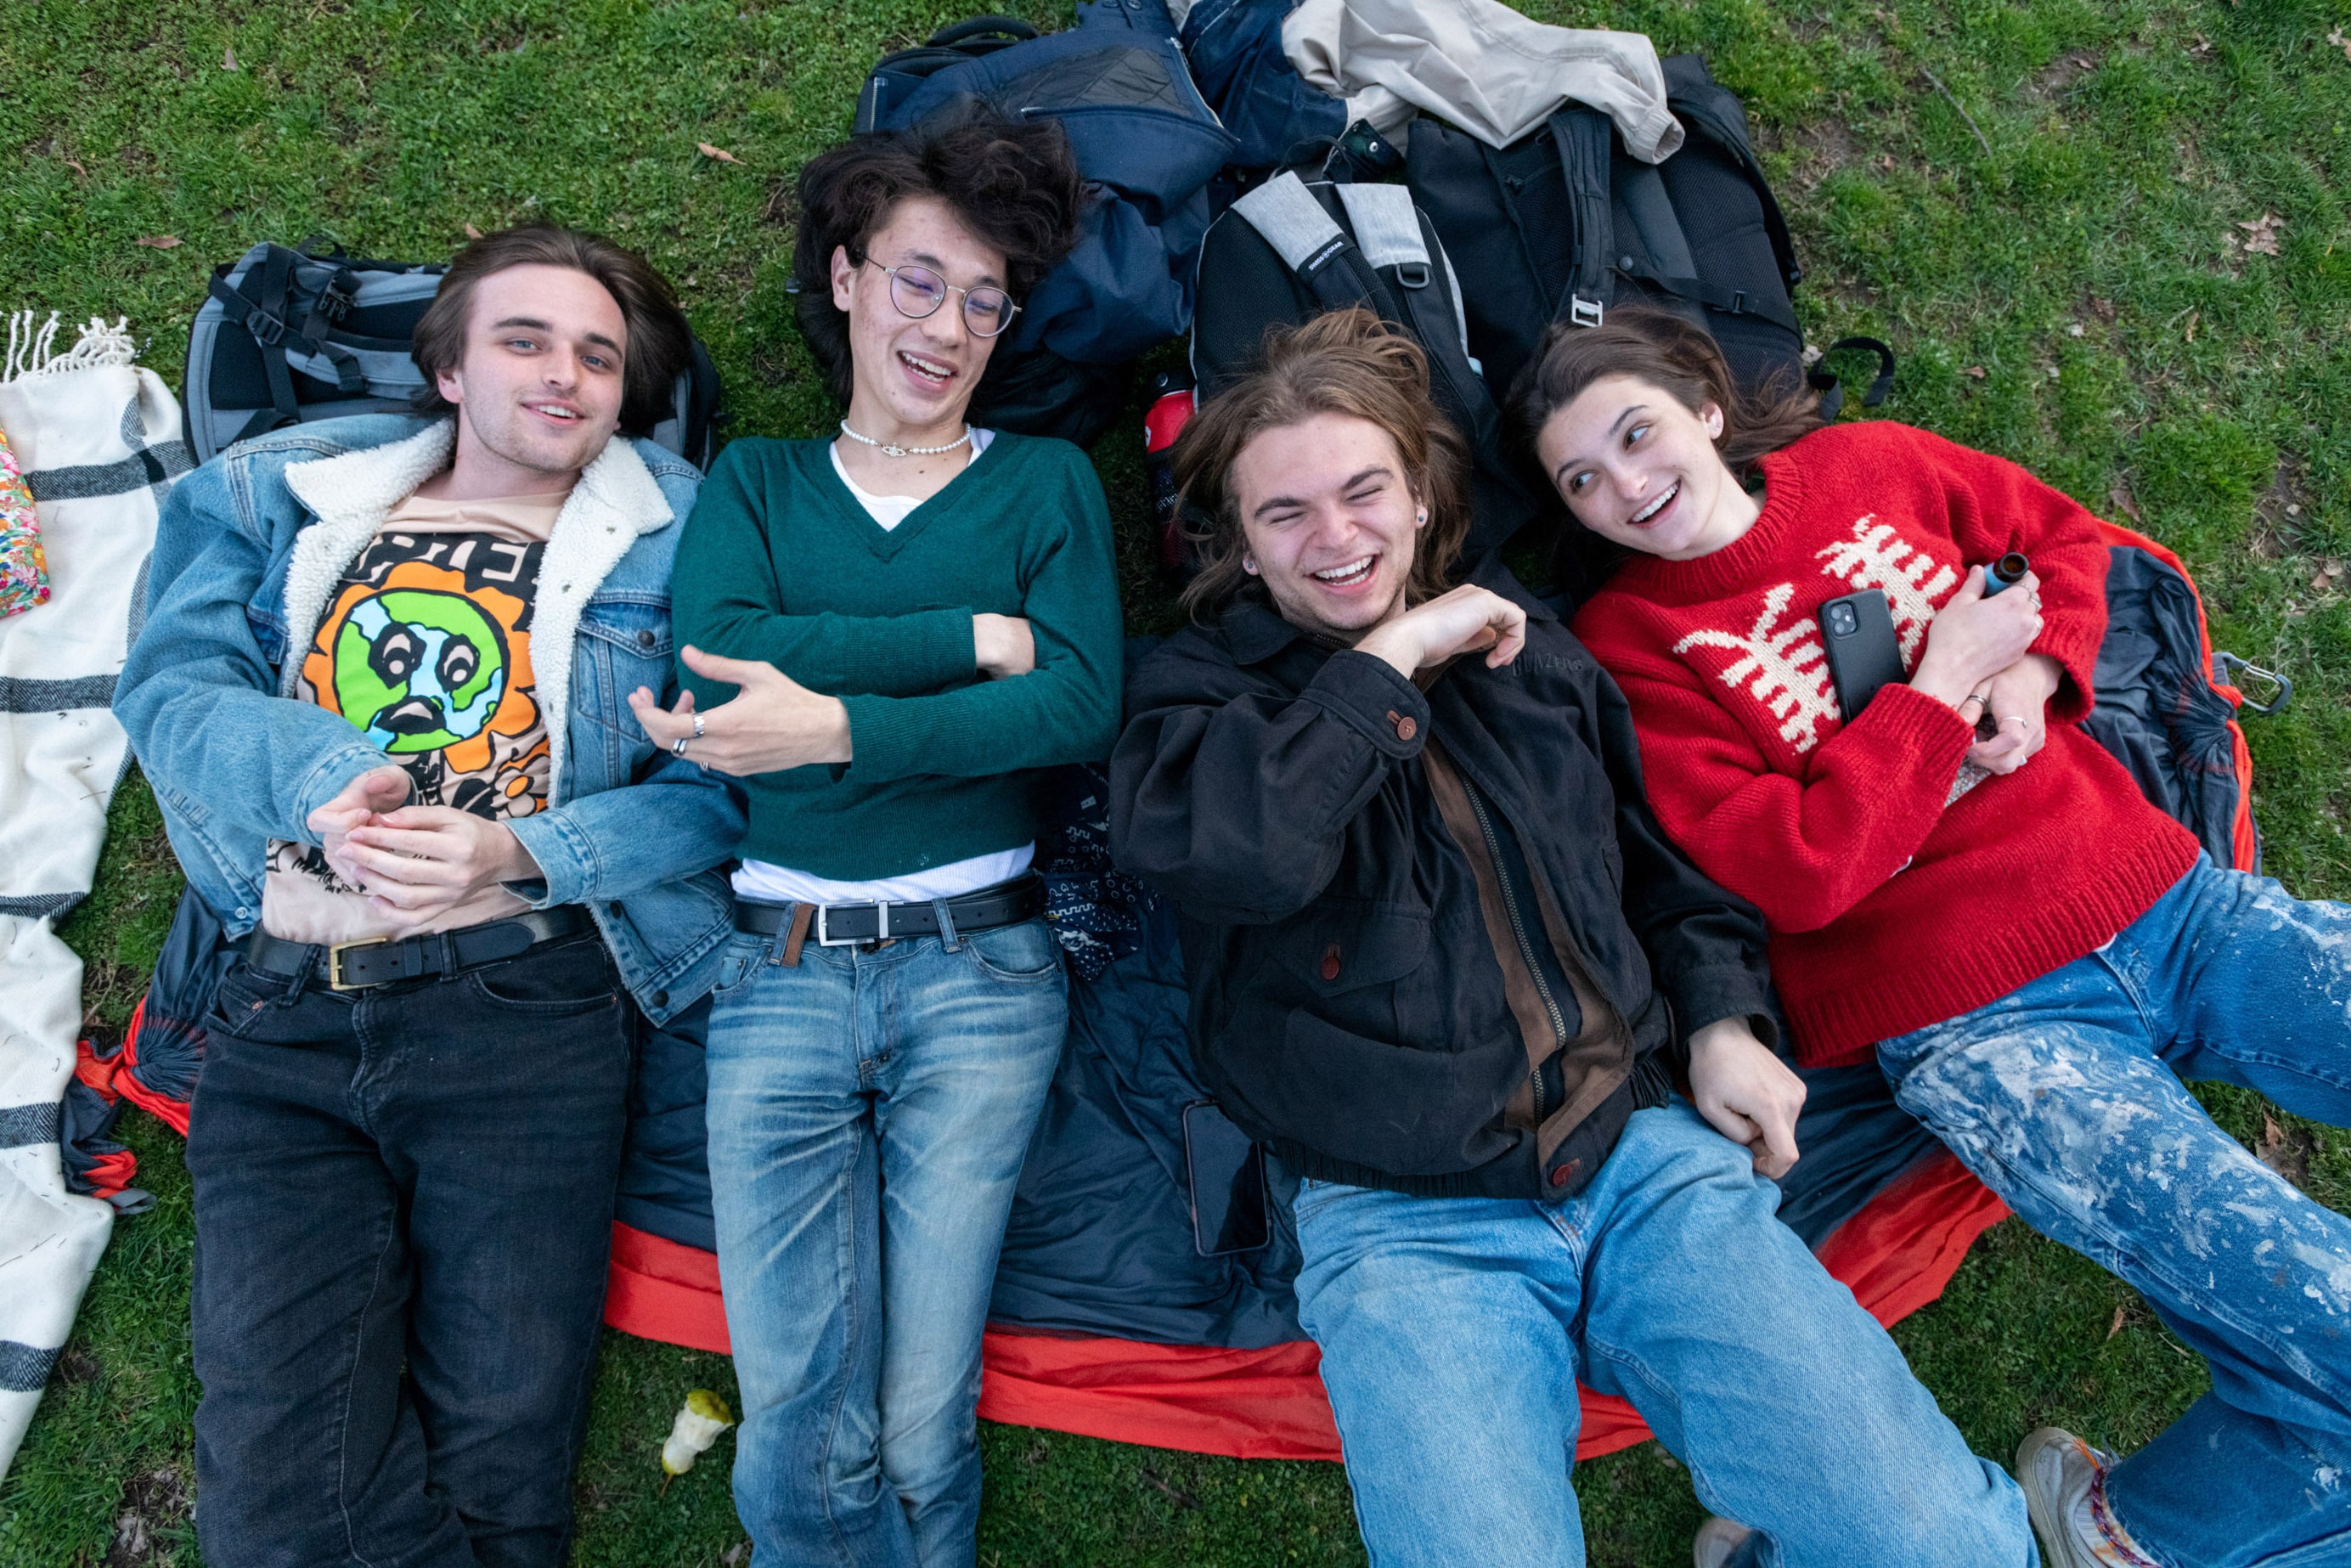 Four students lie on a blanket spread on the grass